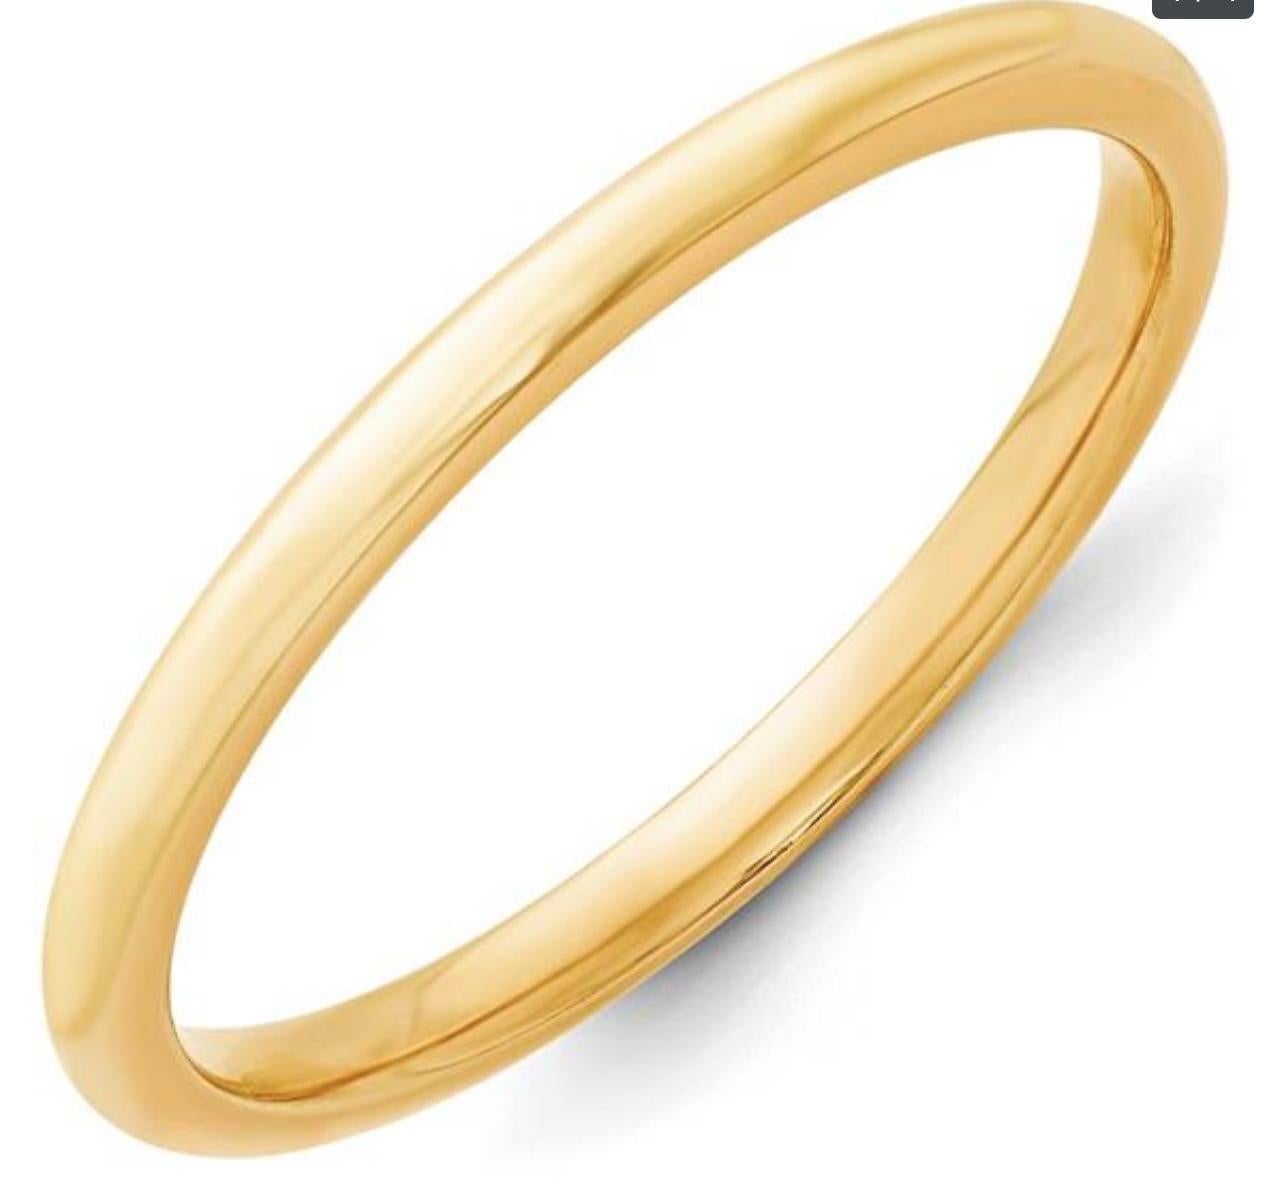 
 14 Karat Yellow Gold Half Round Classic Wedding Band Solid Ring Size 8
This timeless style adds a Light classic domed band. Quality craftsmanship makes this long lasting band a great value. rounded inside edge for increased comfort.
High